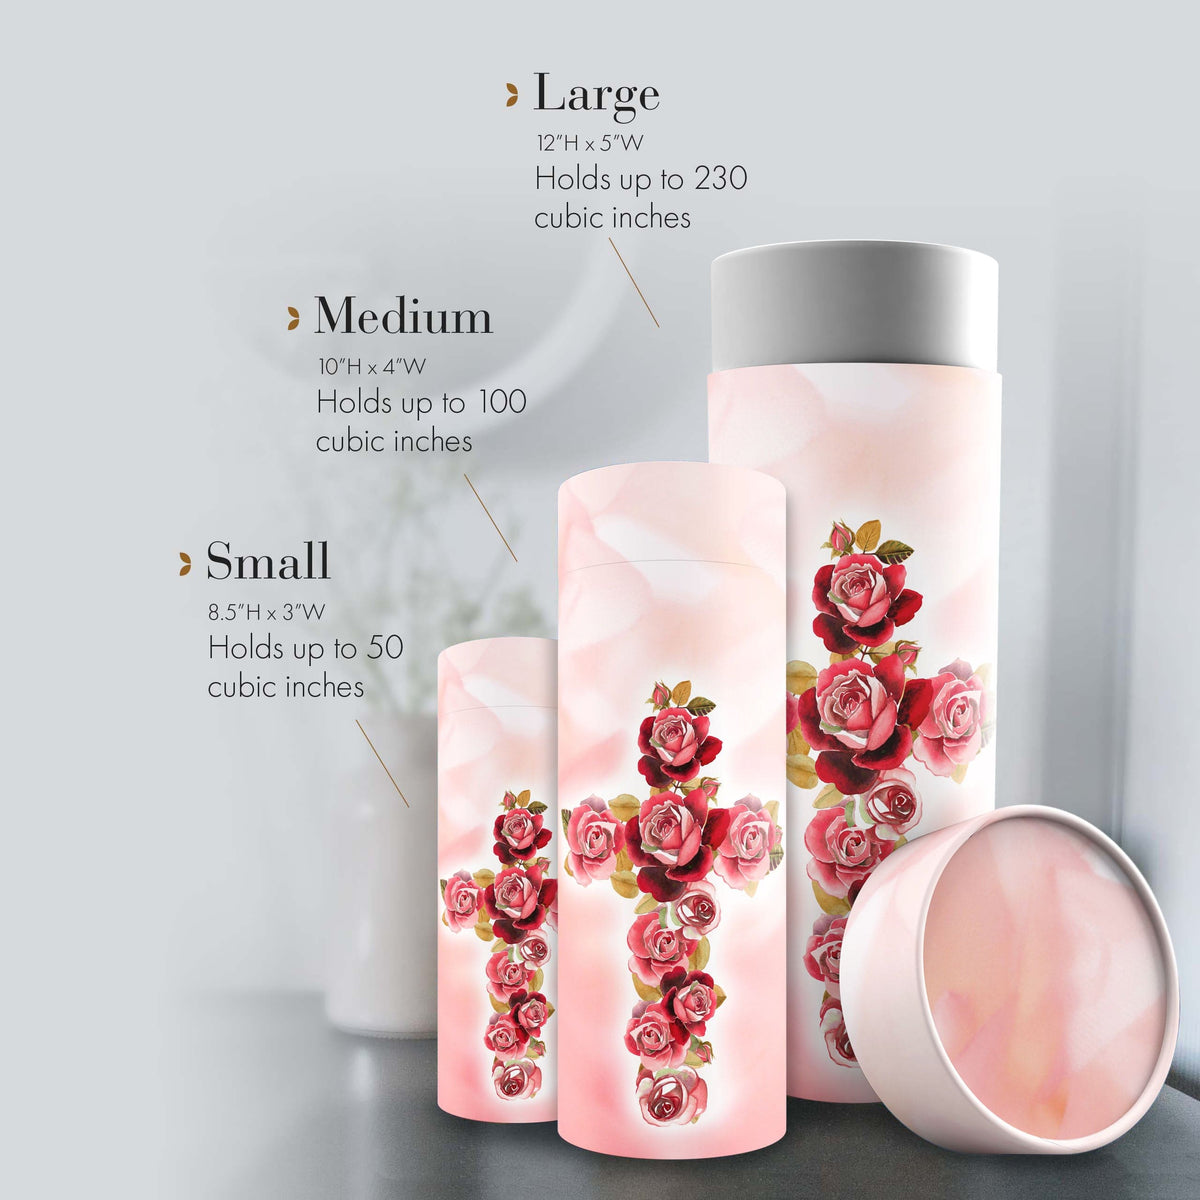 Commemorative Cremation Urns Holy Roses - Biodegradable &amp; Eco Friendly Burial or Scattering Urn / Tube